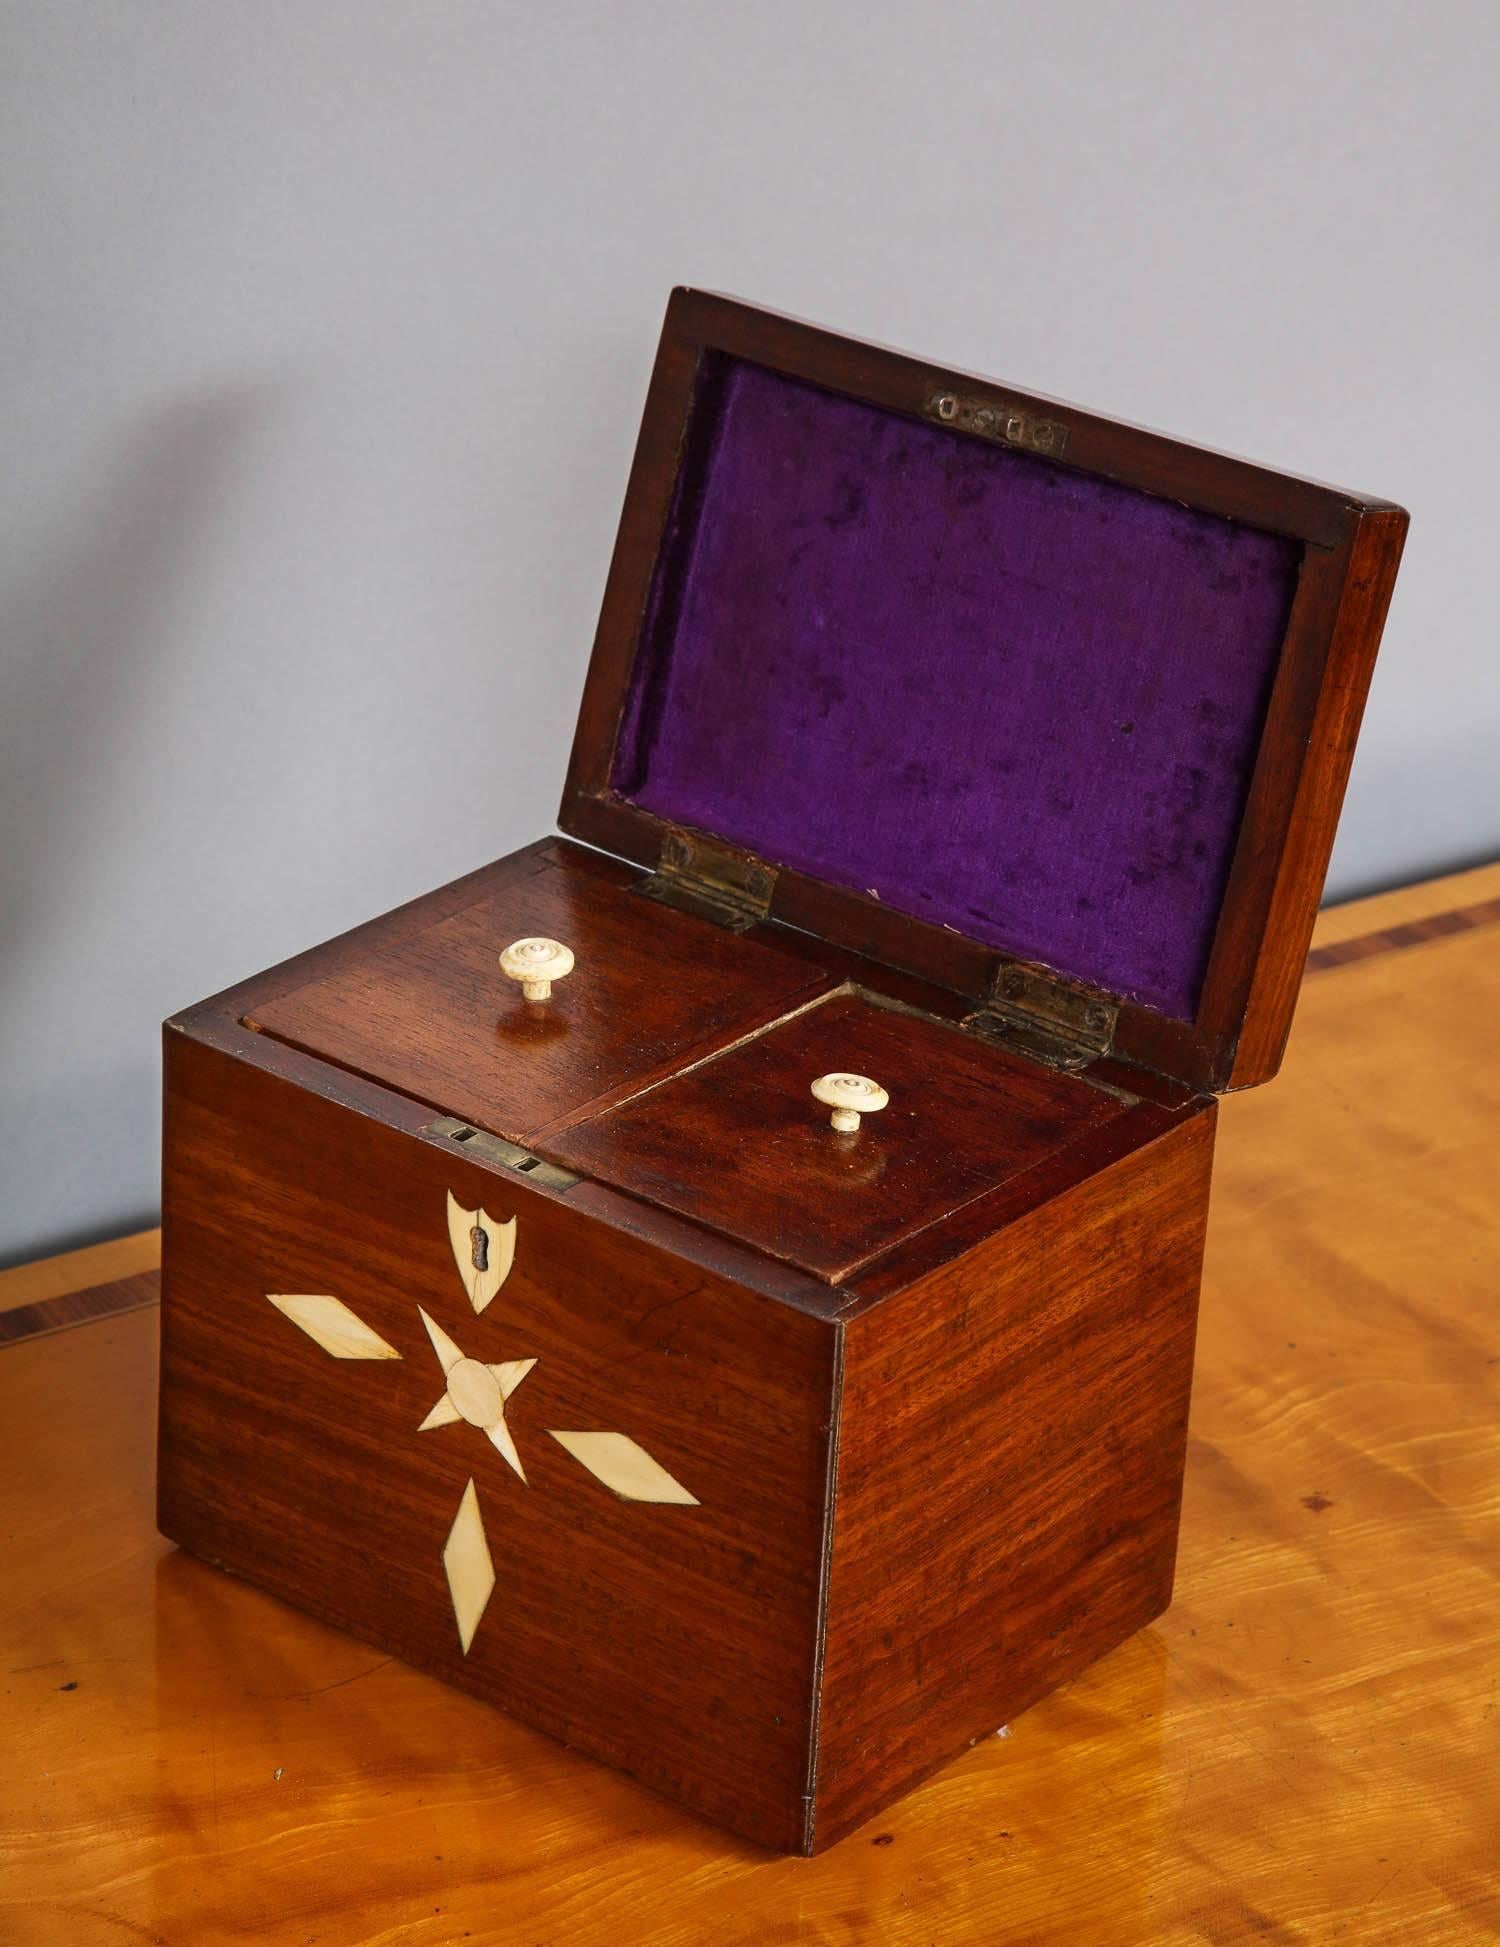 Fine 19th century mahogany and bone inlaid box having diamond inlaid top, the front with shield, compass and ray inlay, the interior with two compartments each with wooden lids and bone handles, the whole with good pleasing color. Possibly sailor